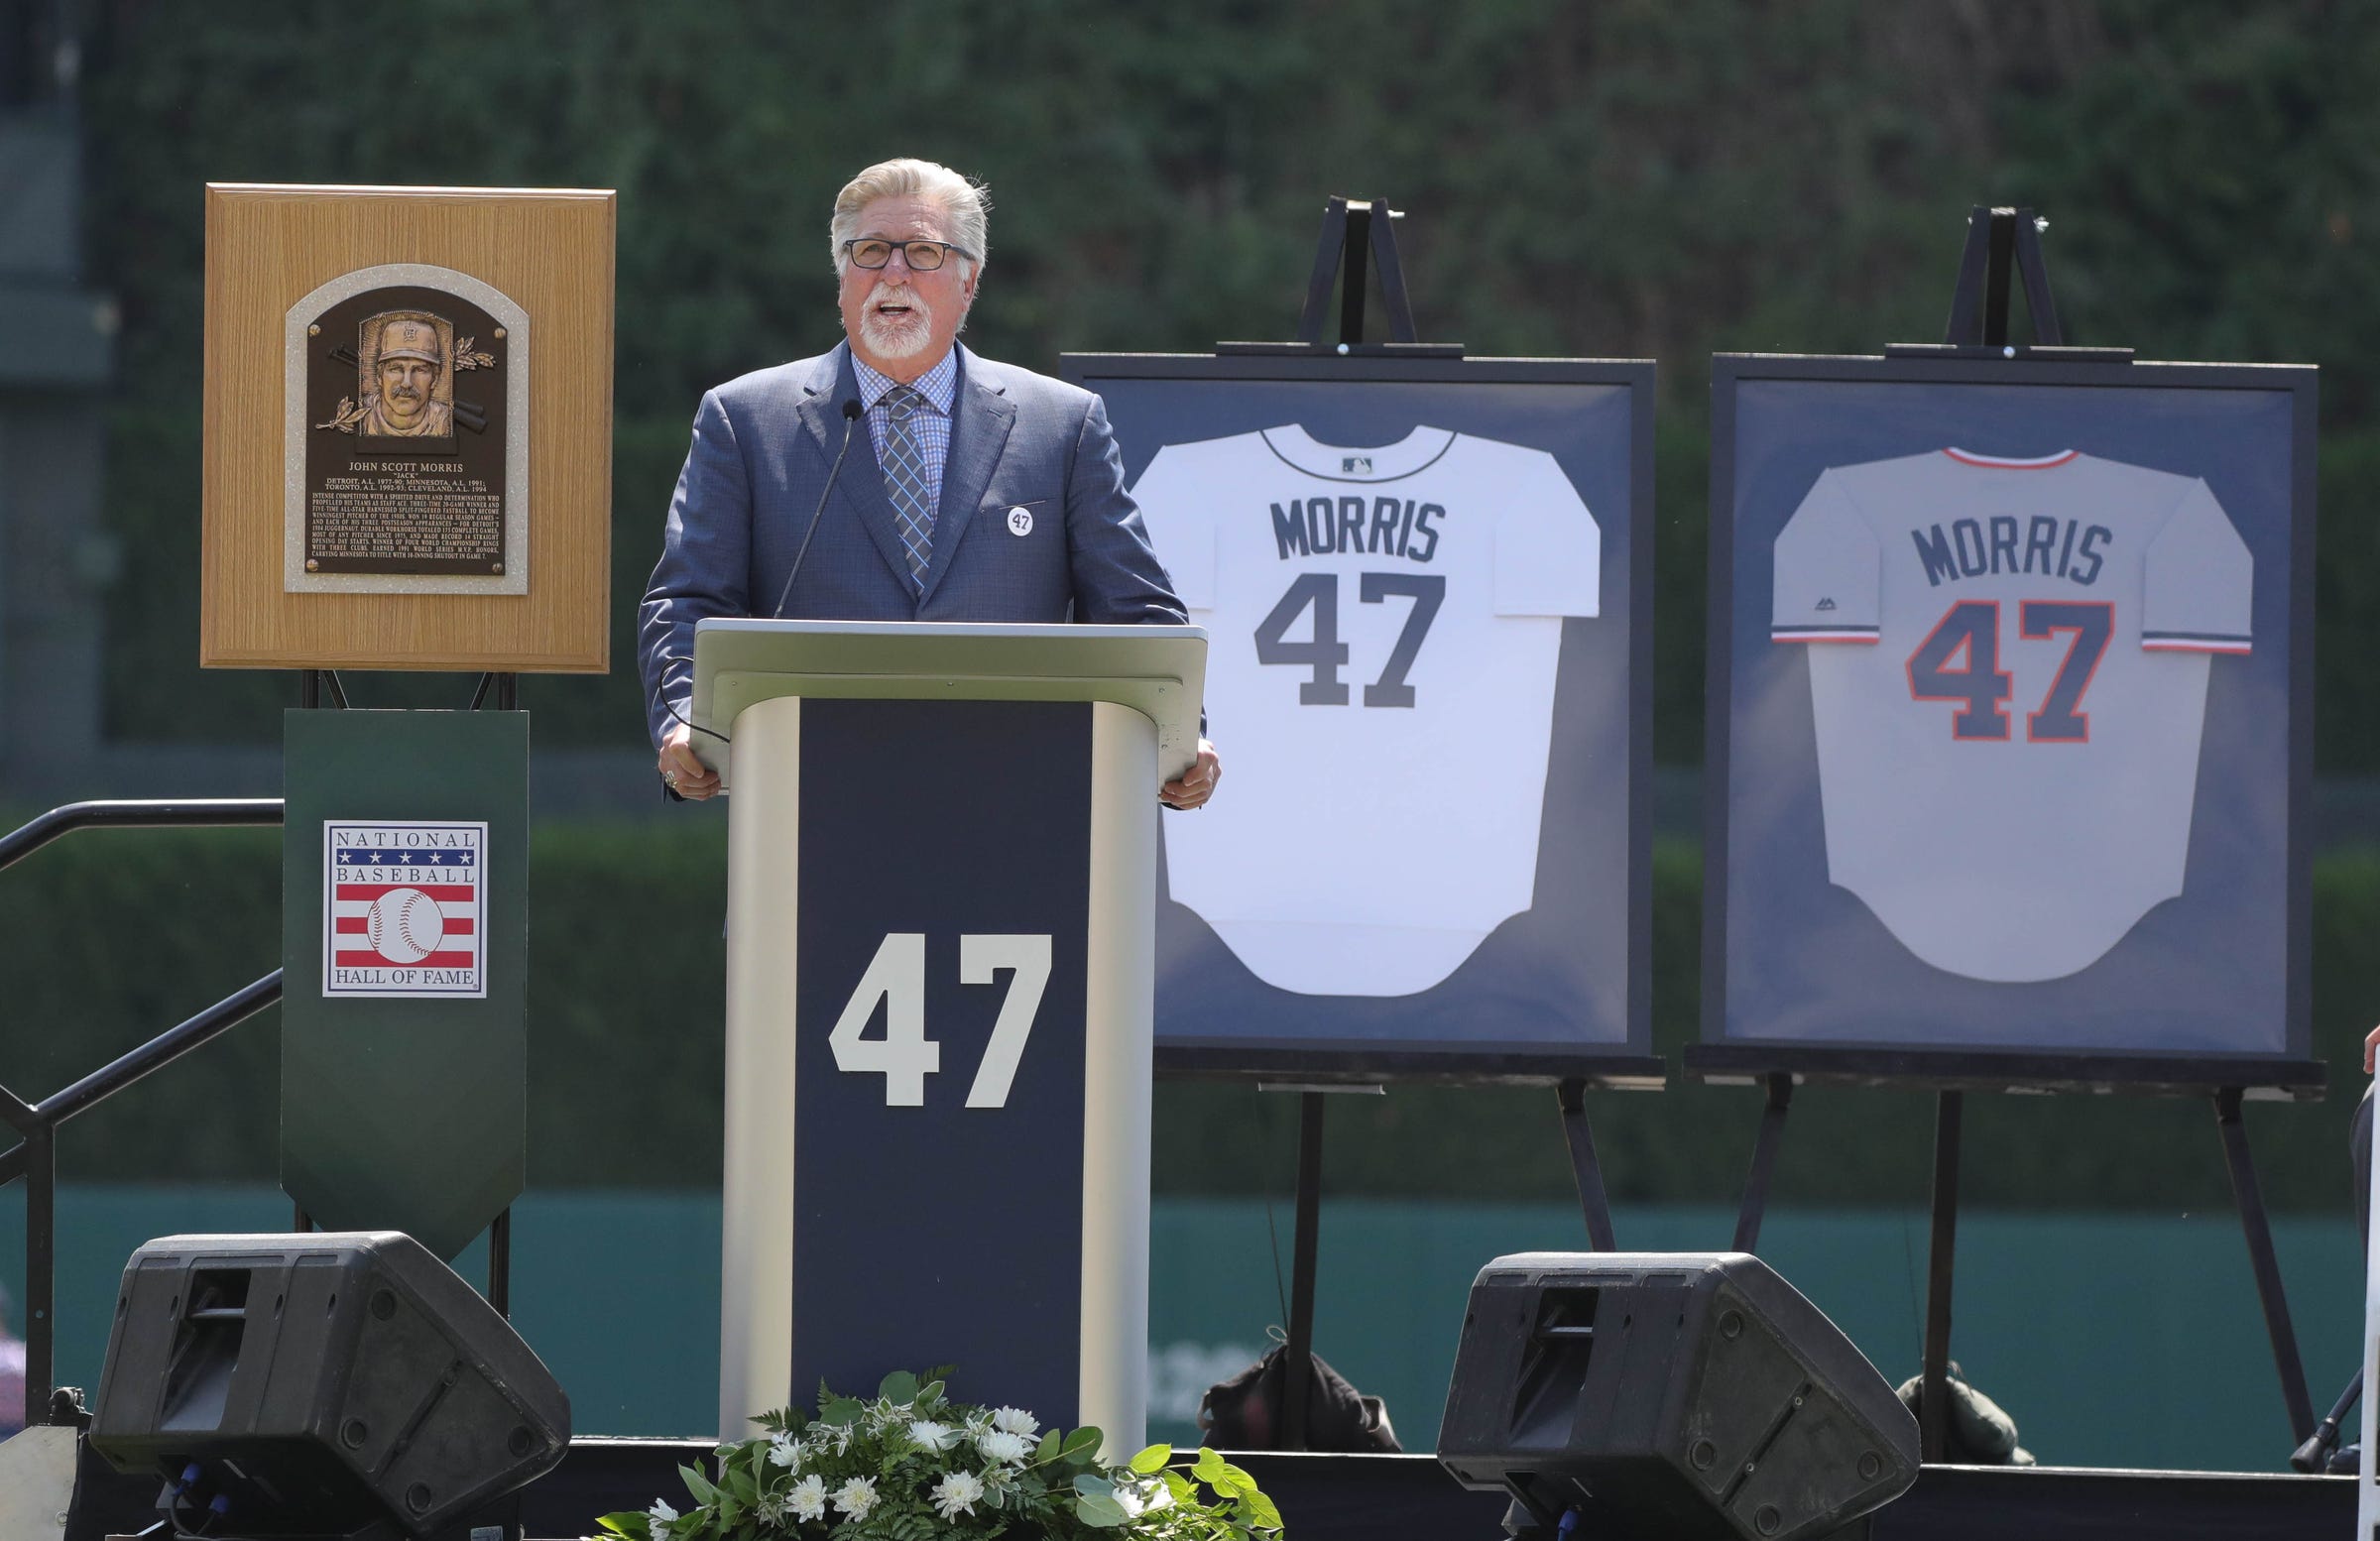 detroit tigers jersey numbers 2018